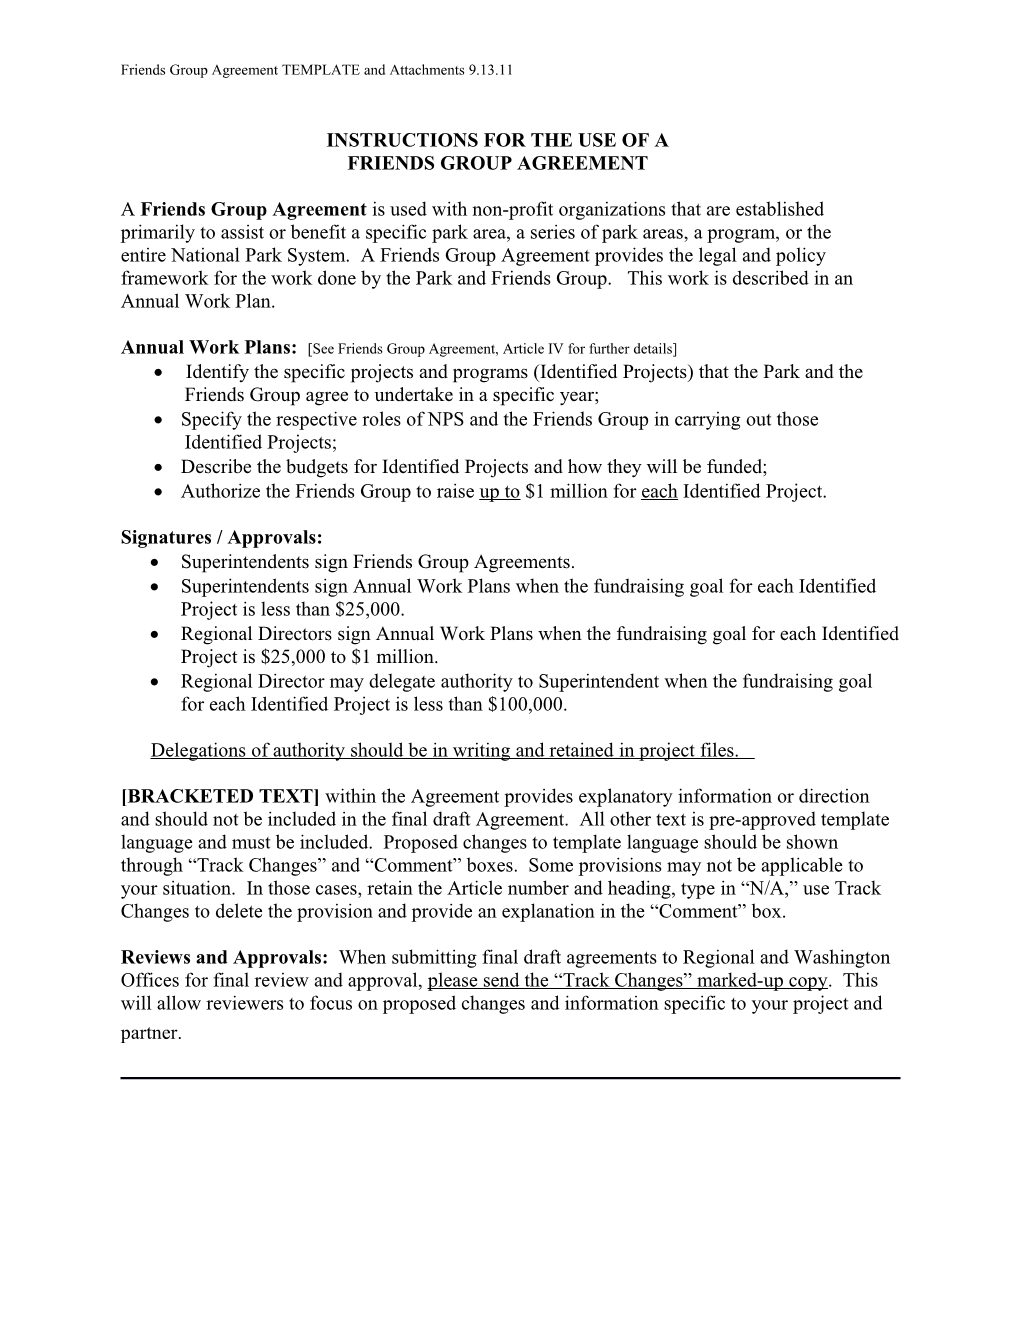 Friends Group Agreement TEMPLATE and Attachments 9.13.11